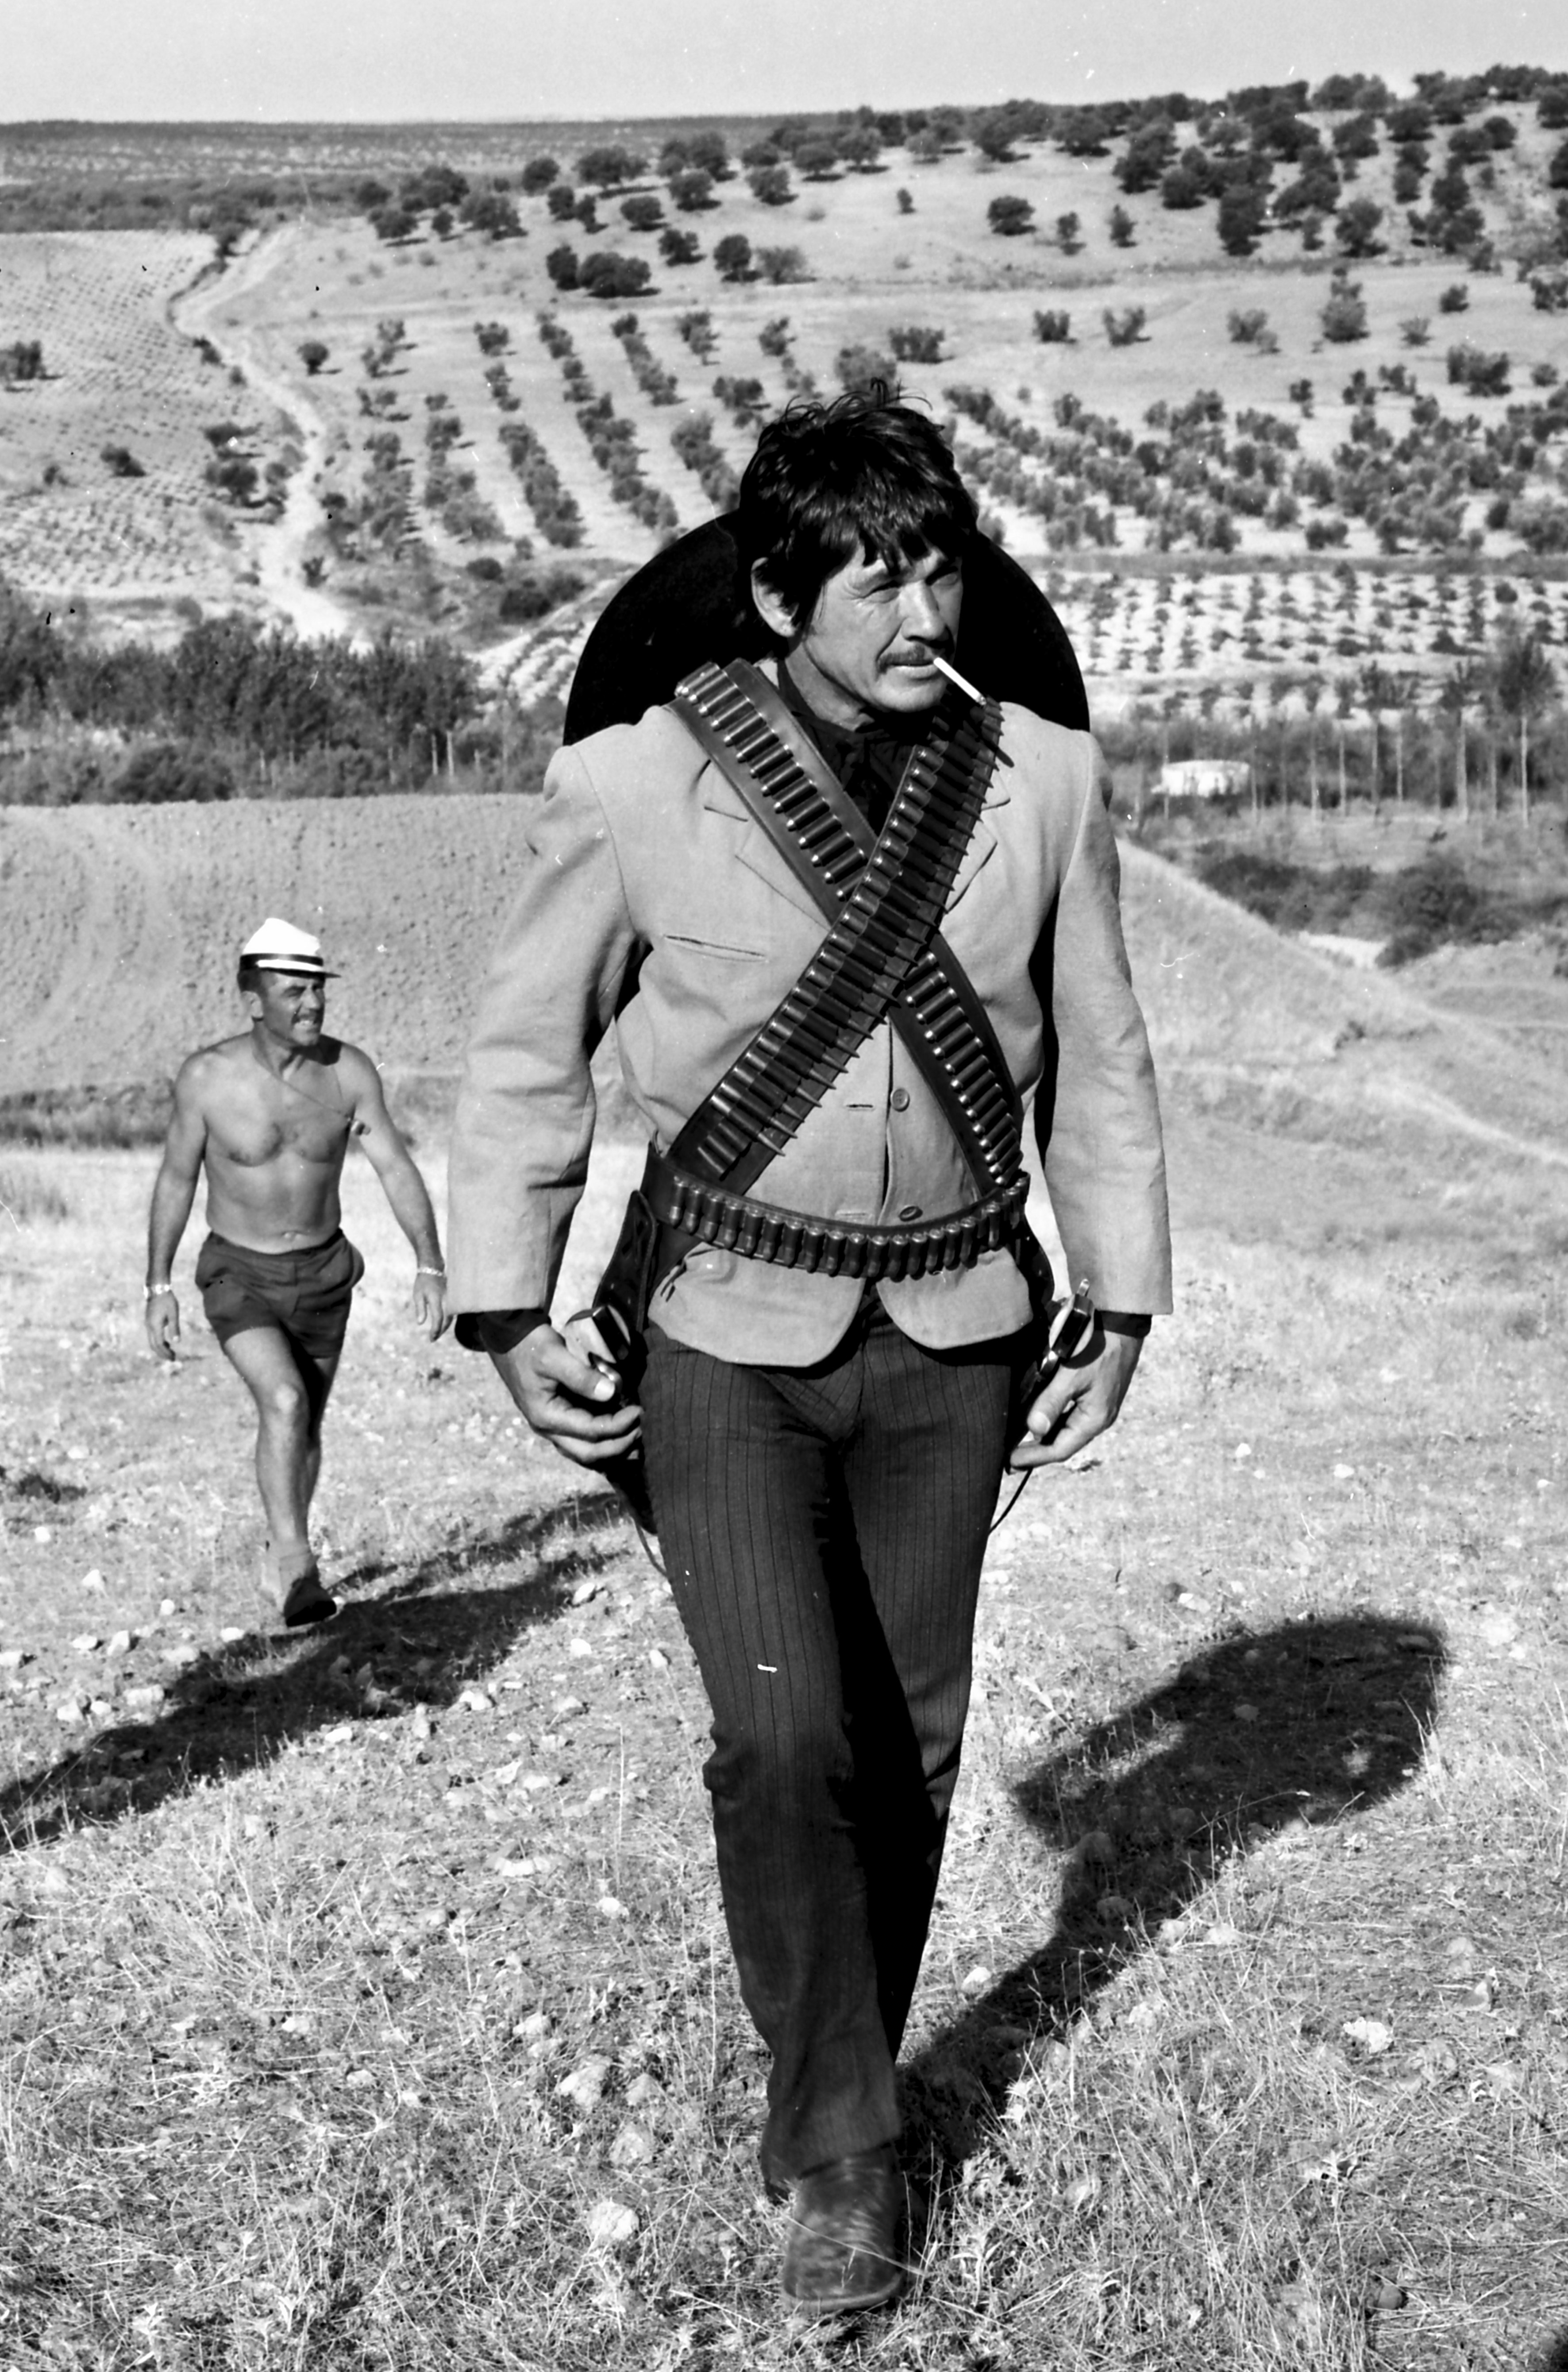 Charles Bronson during the filming of the movie "Wild Horses," in December 1972, Almeria, Spain. / Source: Getty Images